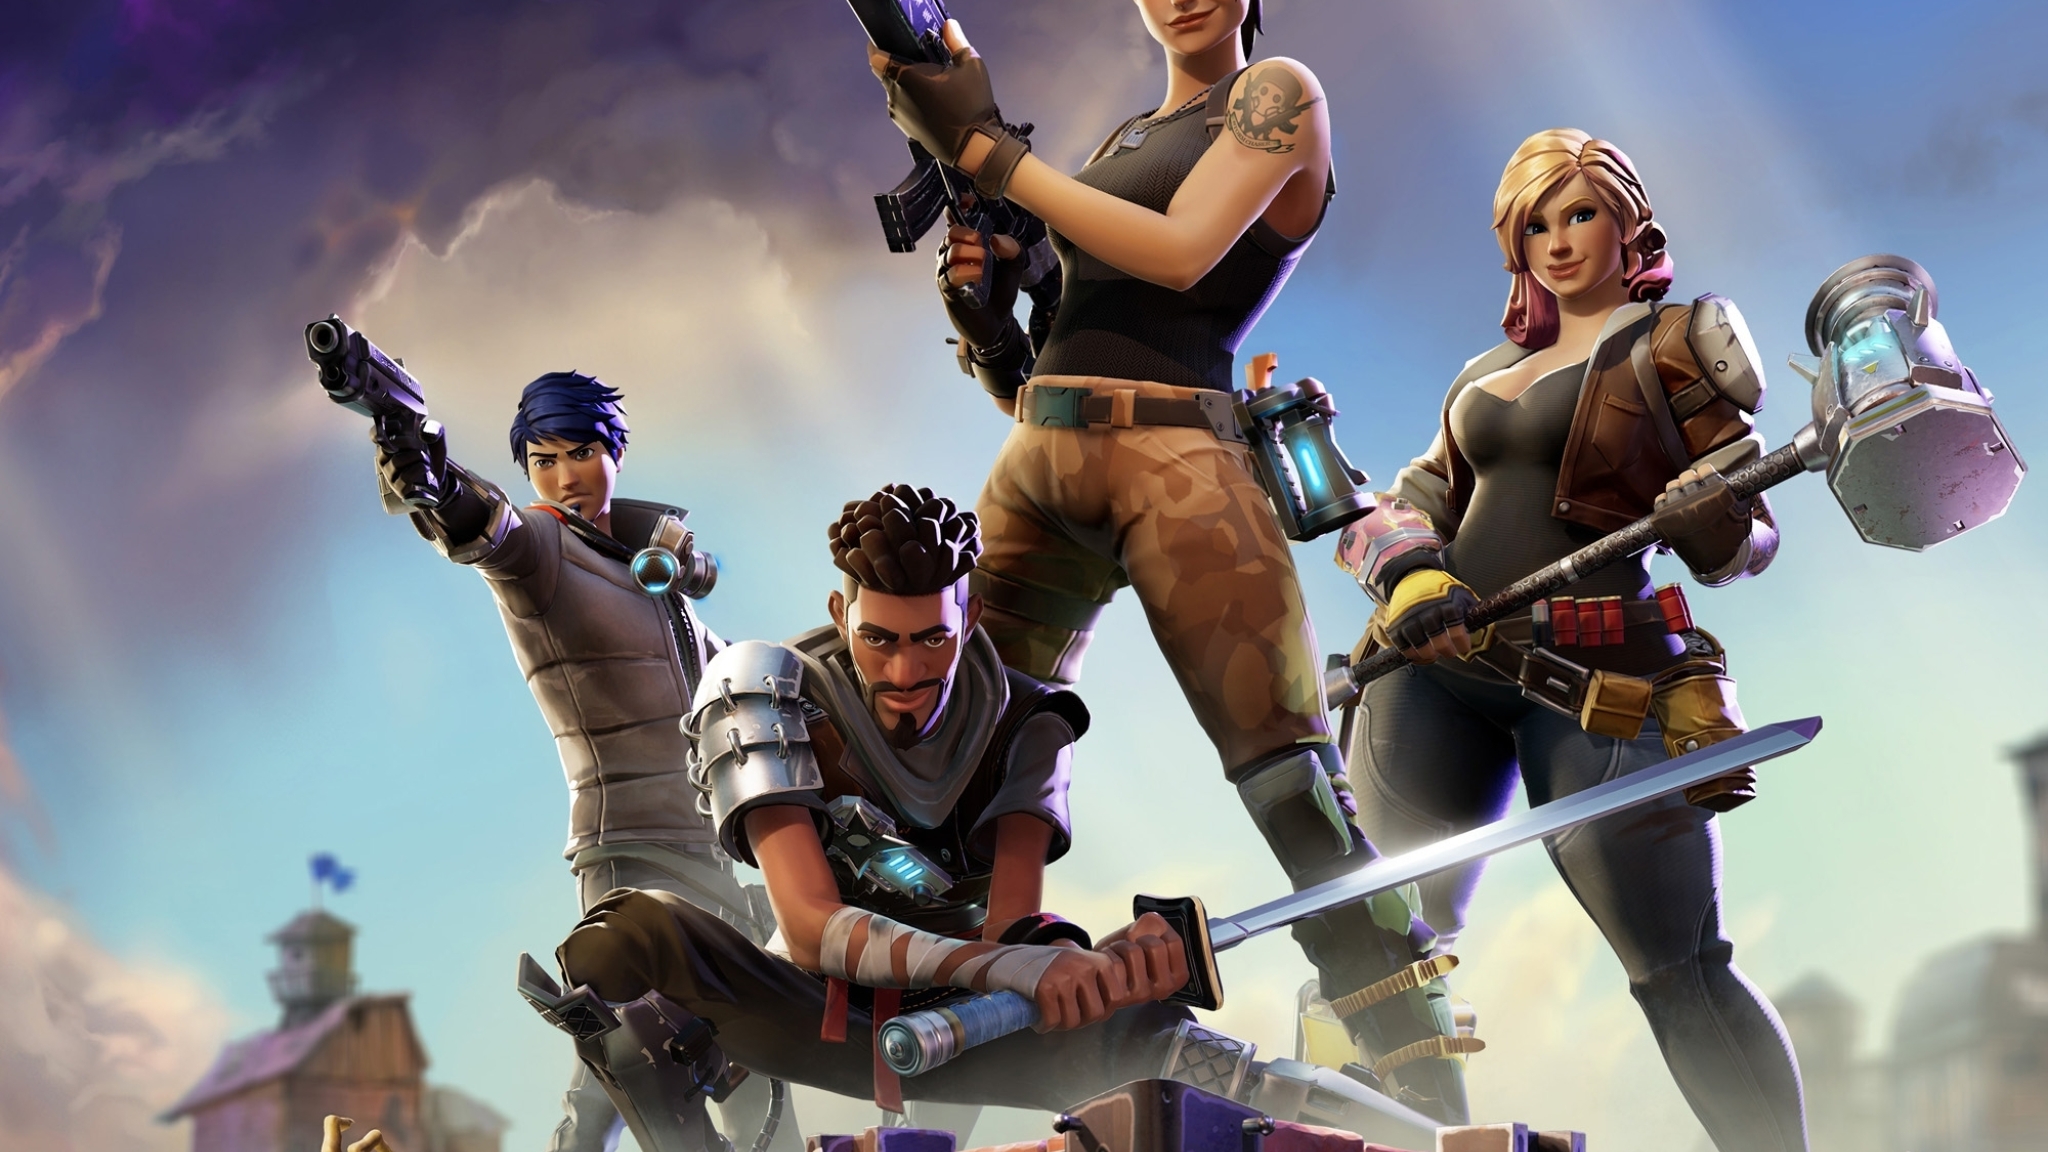 2048x1152 Fortnite Game Poster 2048x1152 Resolution